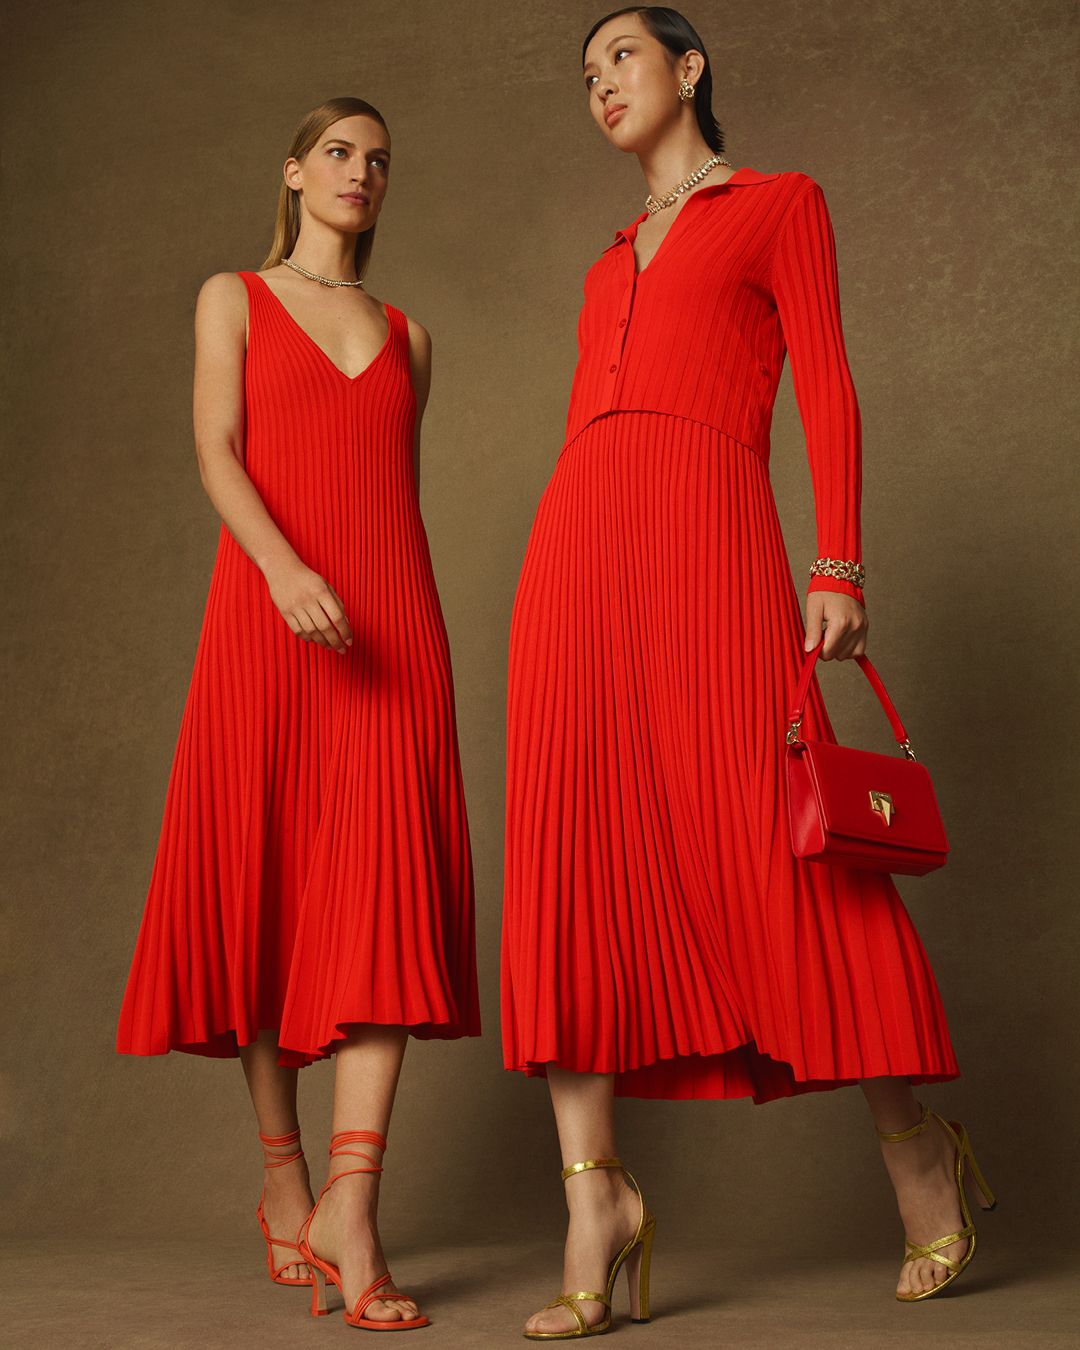 Two models walking towards each other wearing red pleated outfits